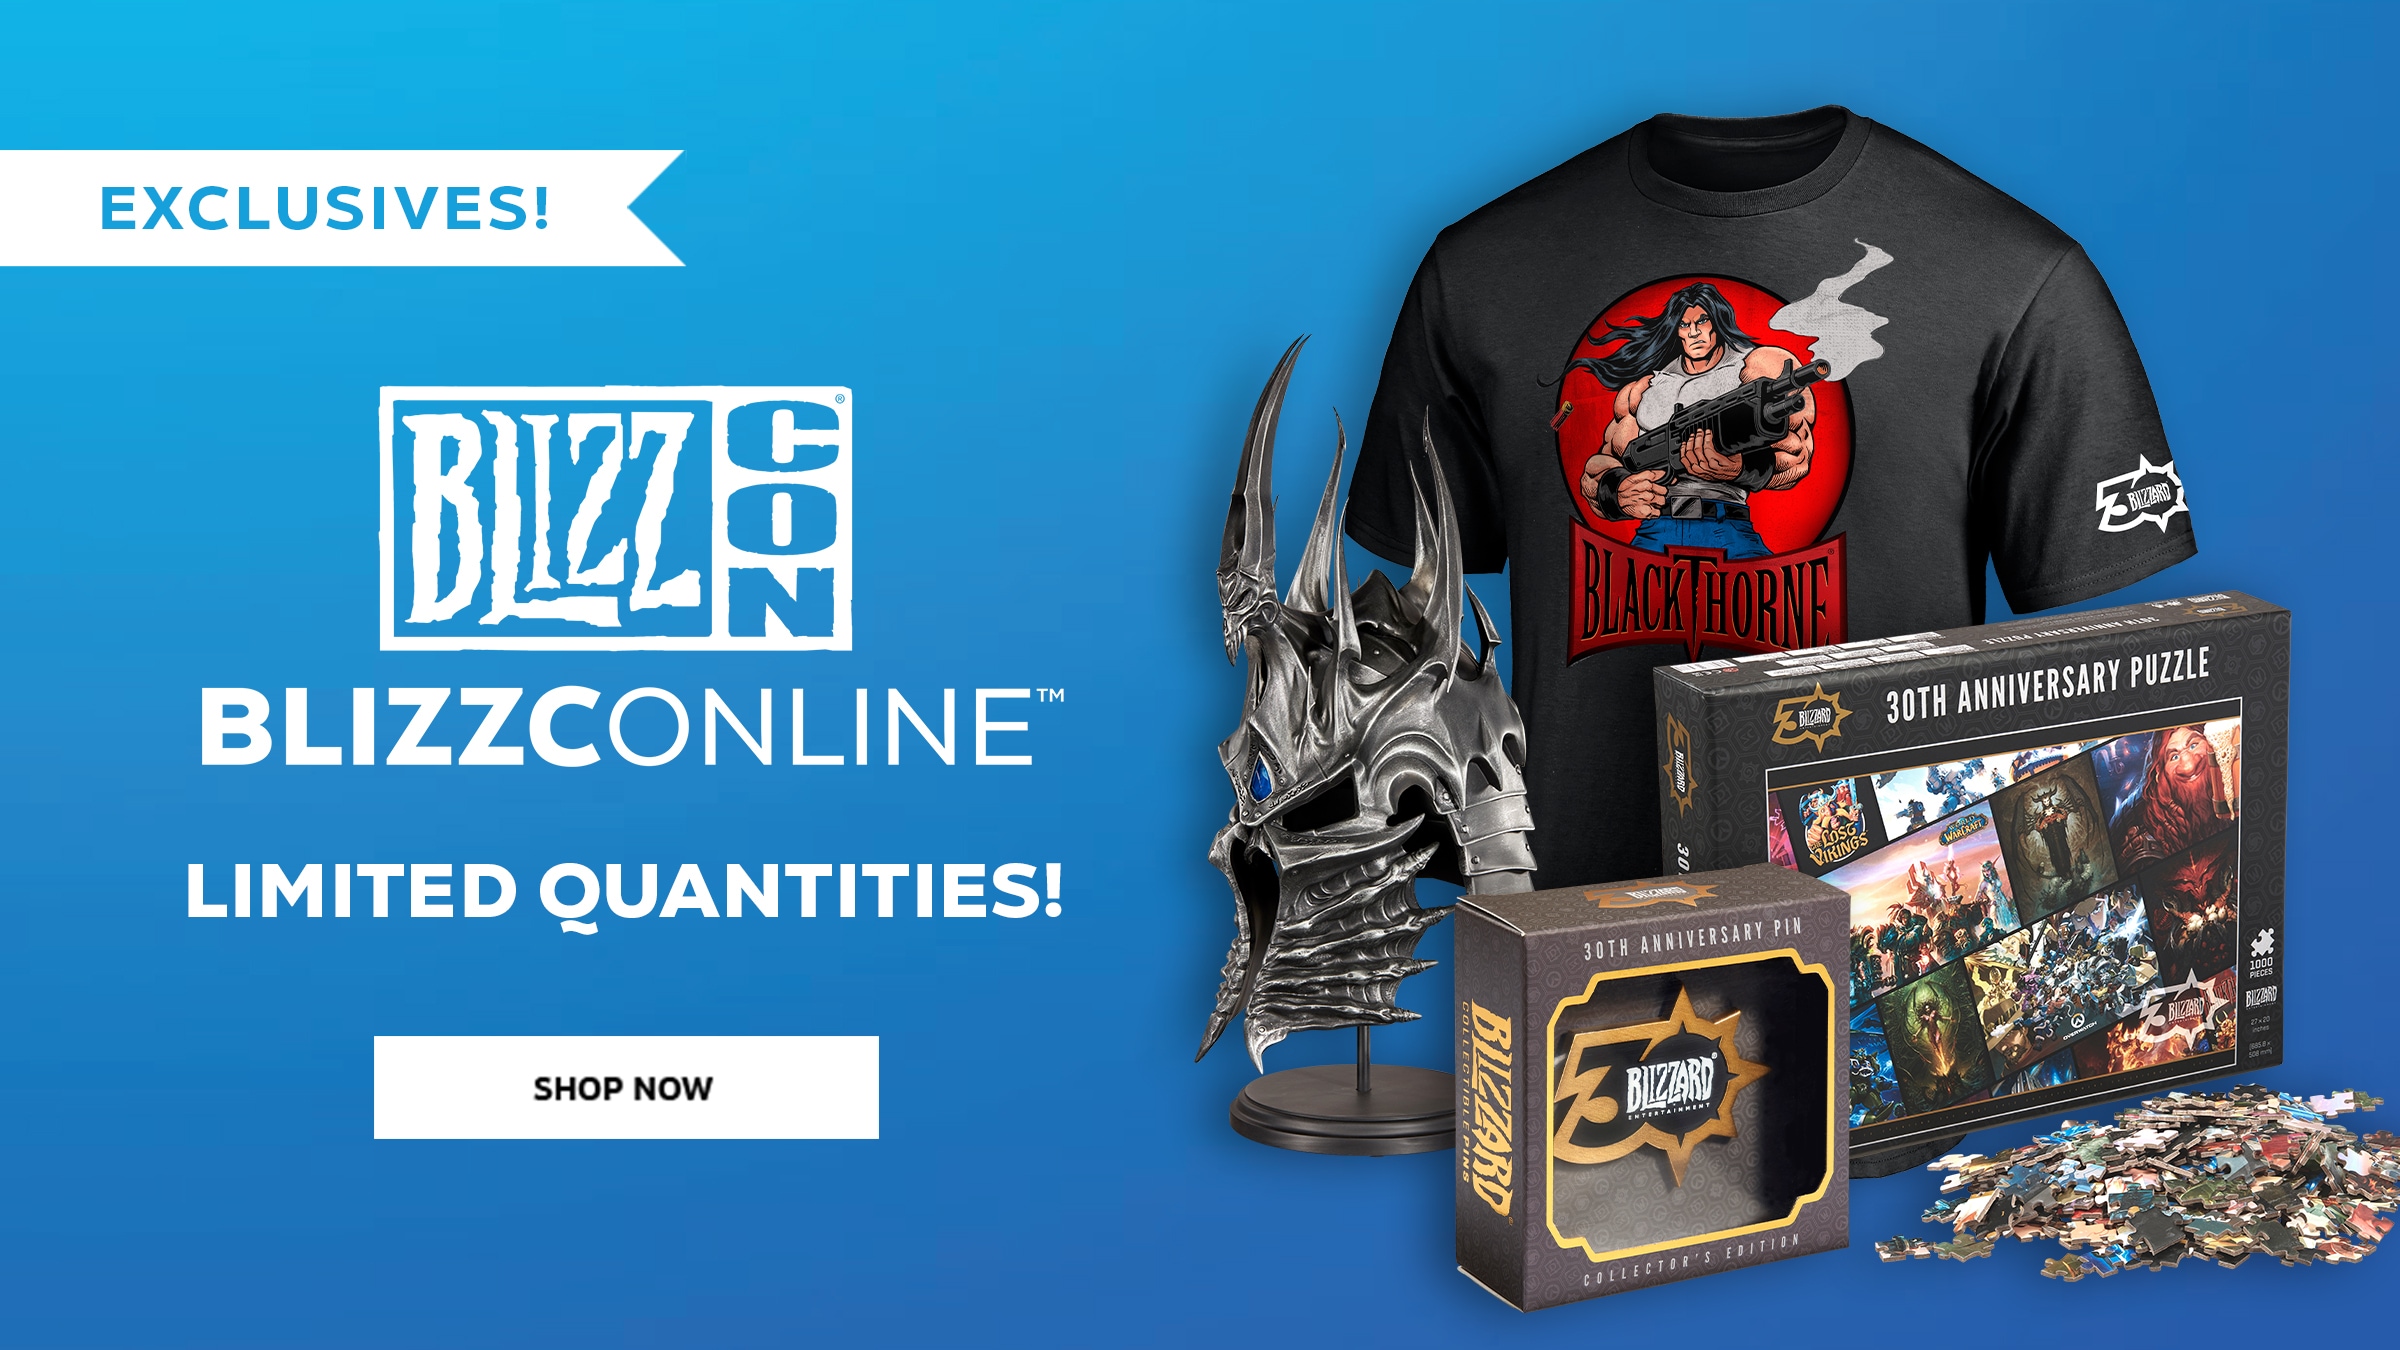 BlizzConline Gear Is Now Available!